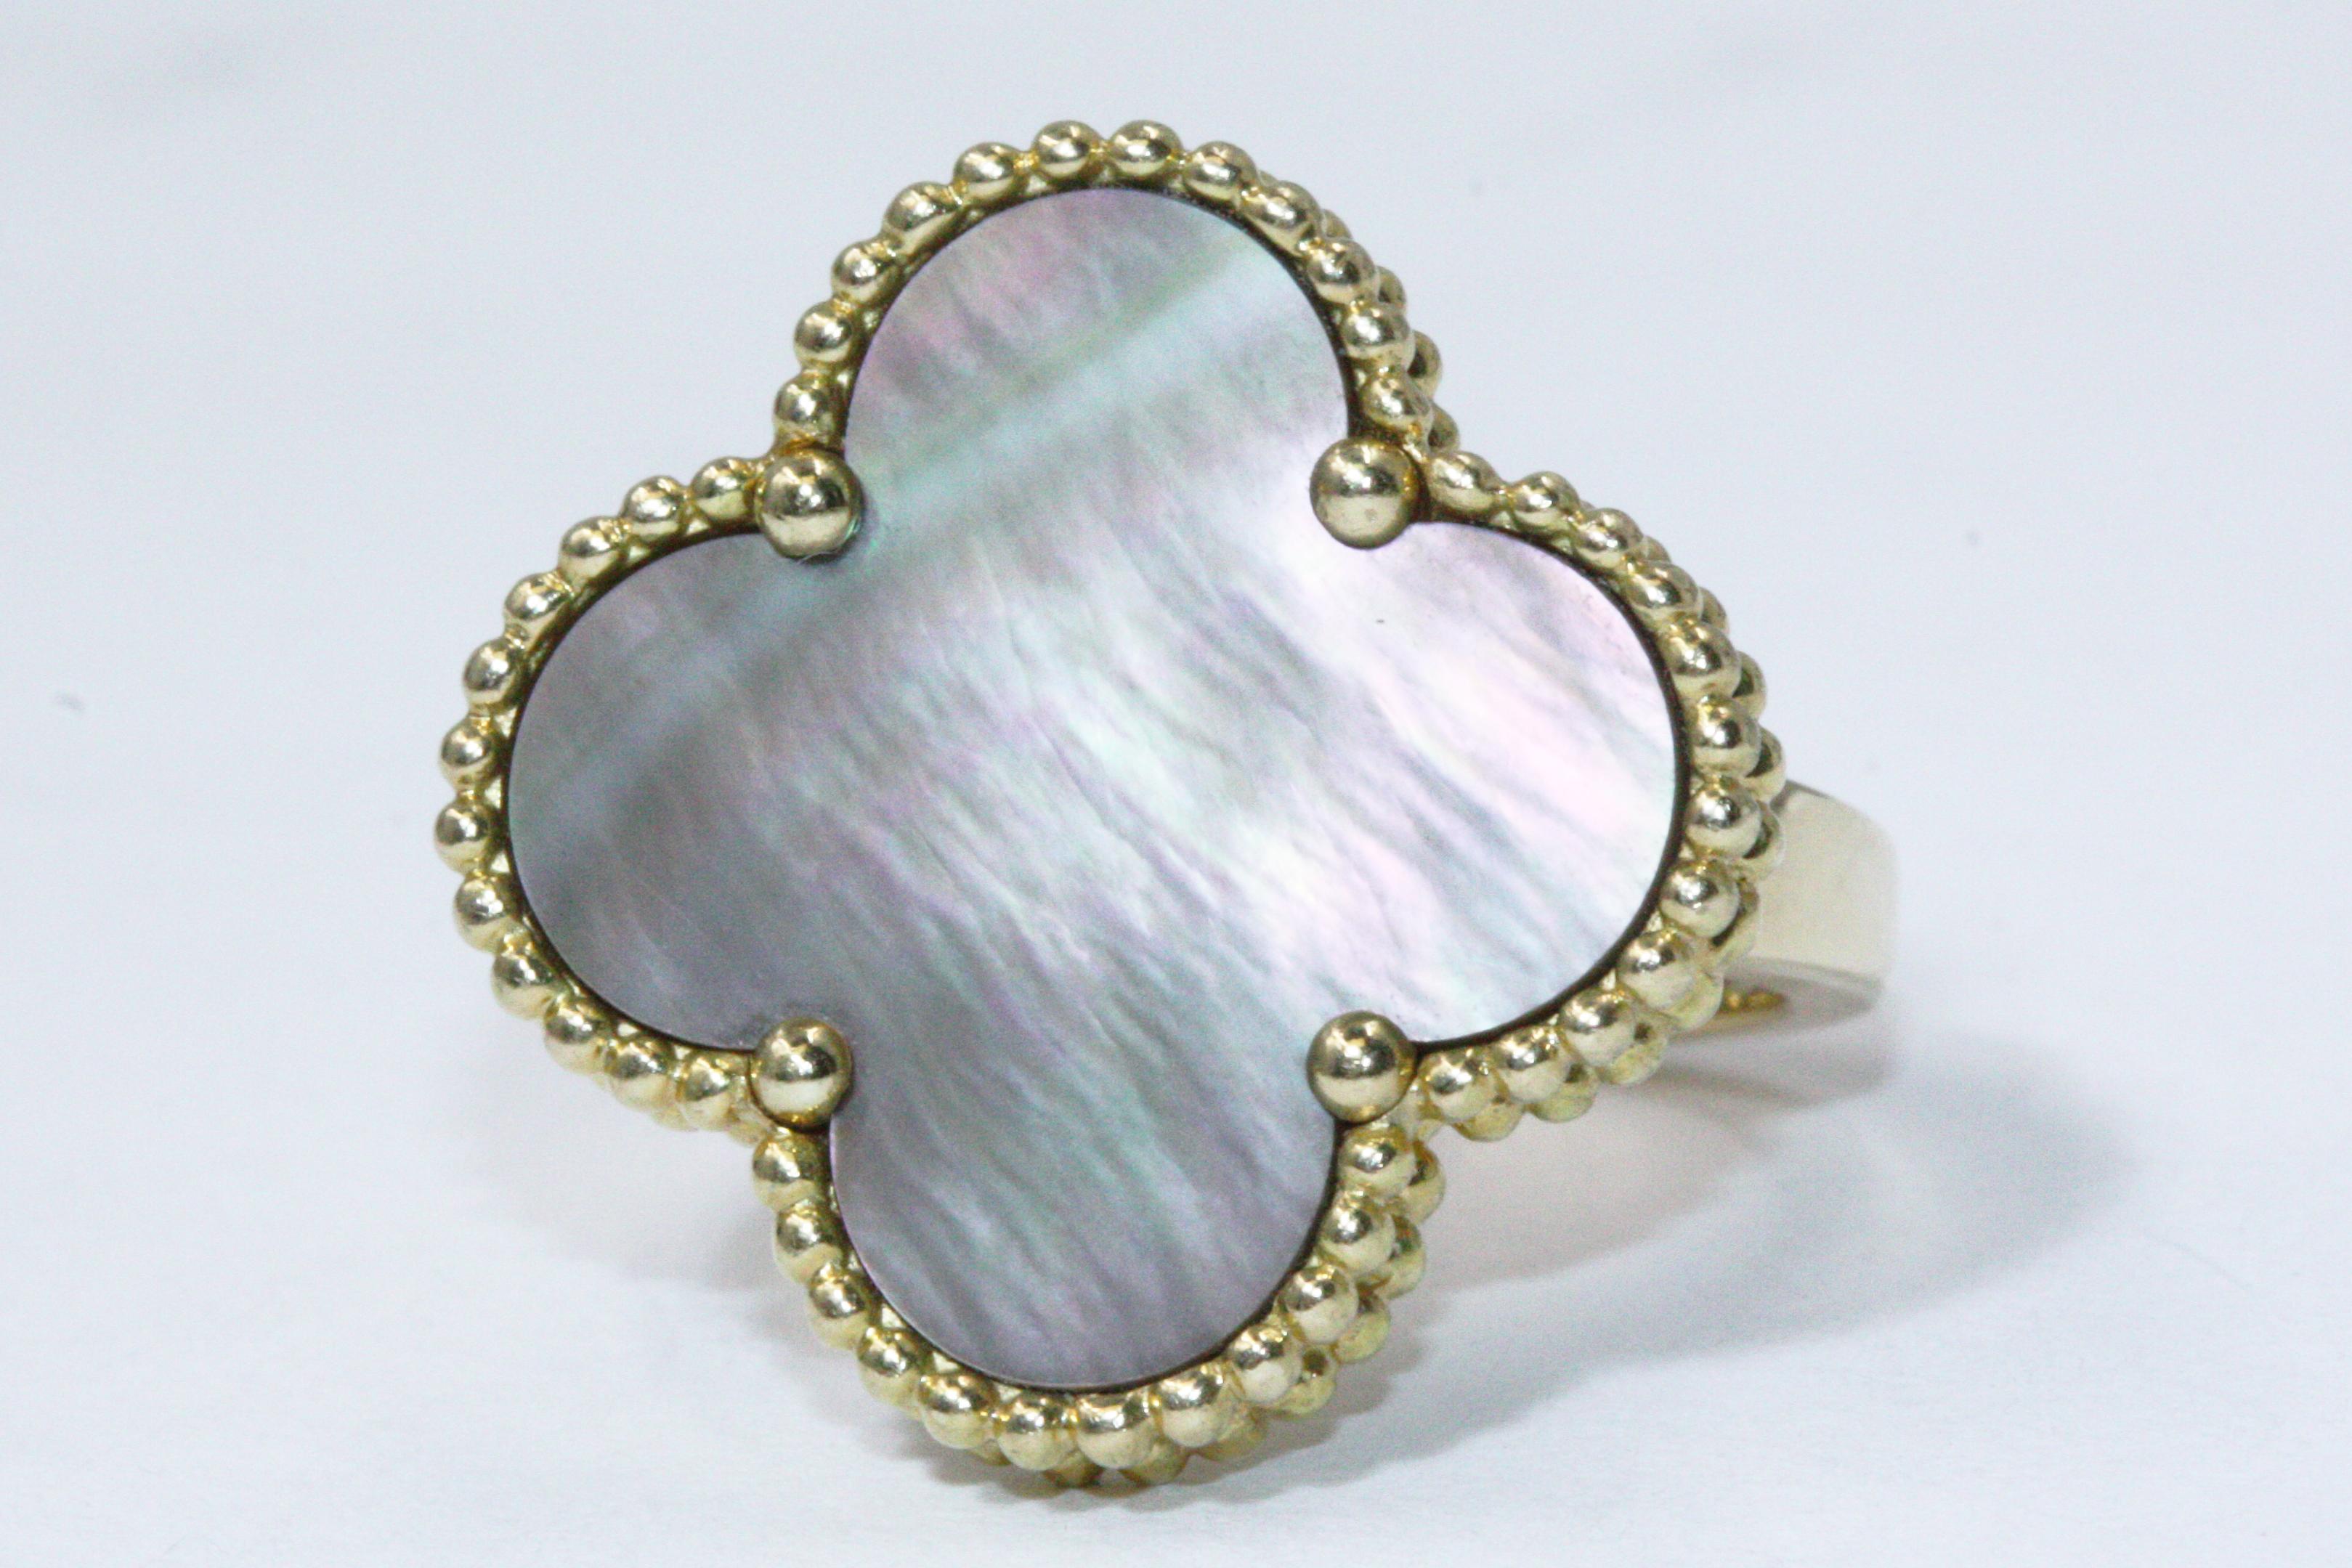 Magic Alhambra ring from Van Cleef & Arpels, made in 18K yellow gold, set with mother-of-pearl.

Stones
Mother-of-pearl : 1 stone

Size EU47 US 4
Boutique Resizable
Weight: 9.5g
Size of the ring face: 2cm x 2cm

Item come with a box and